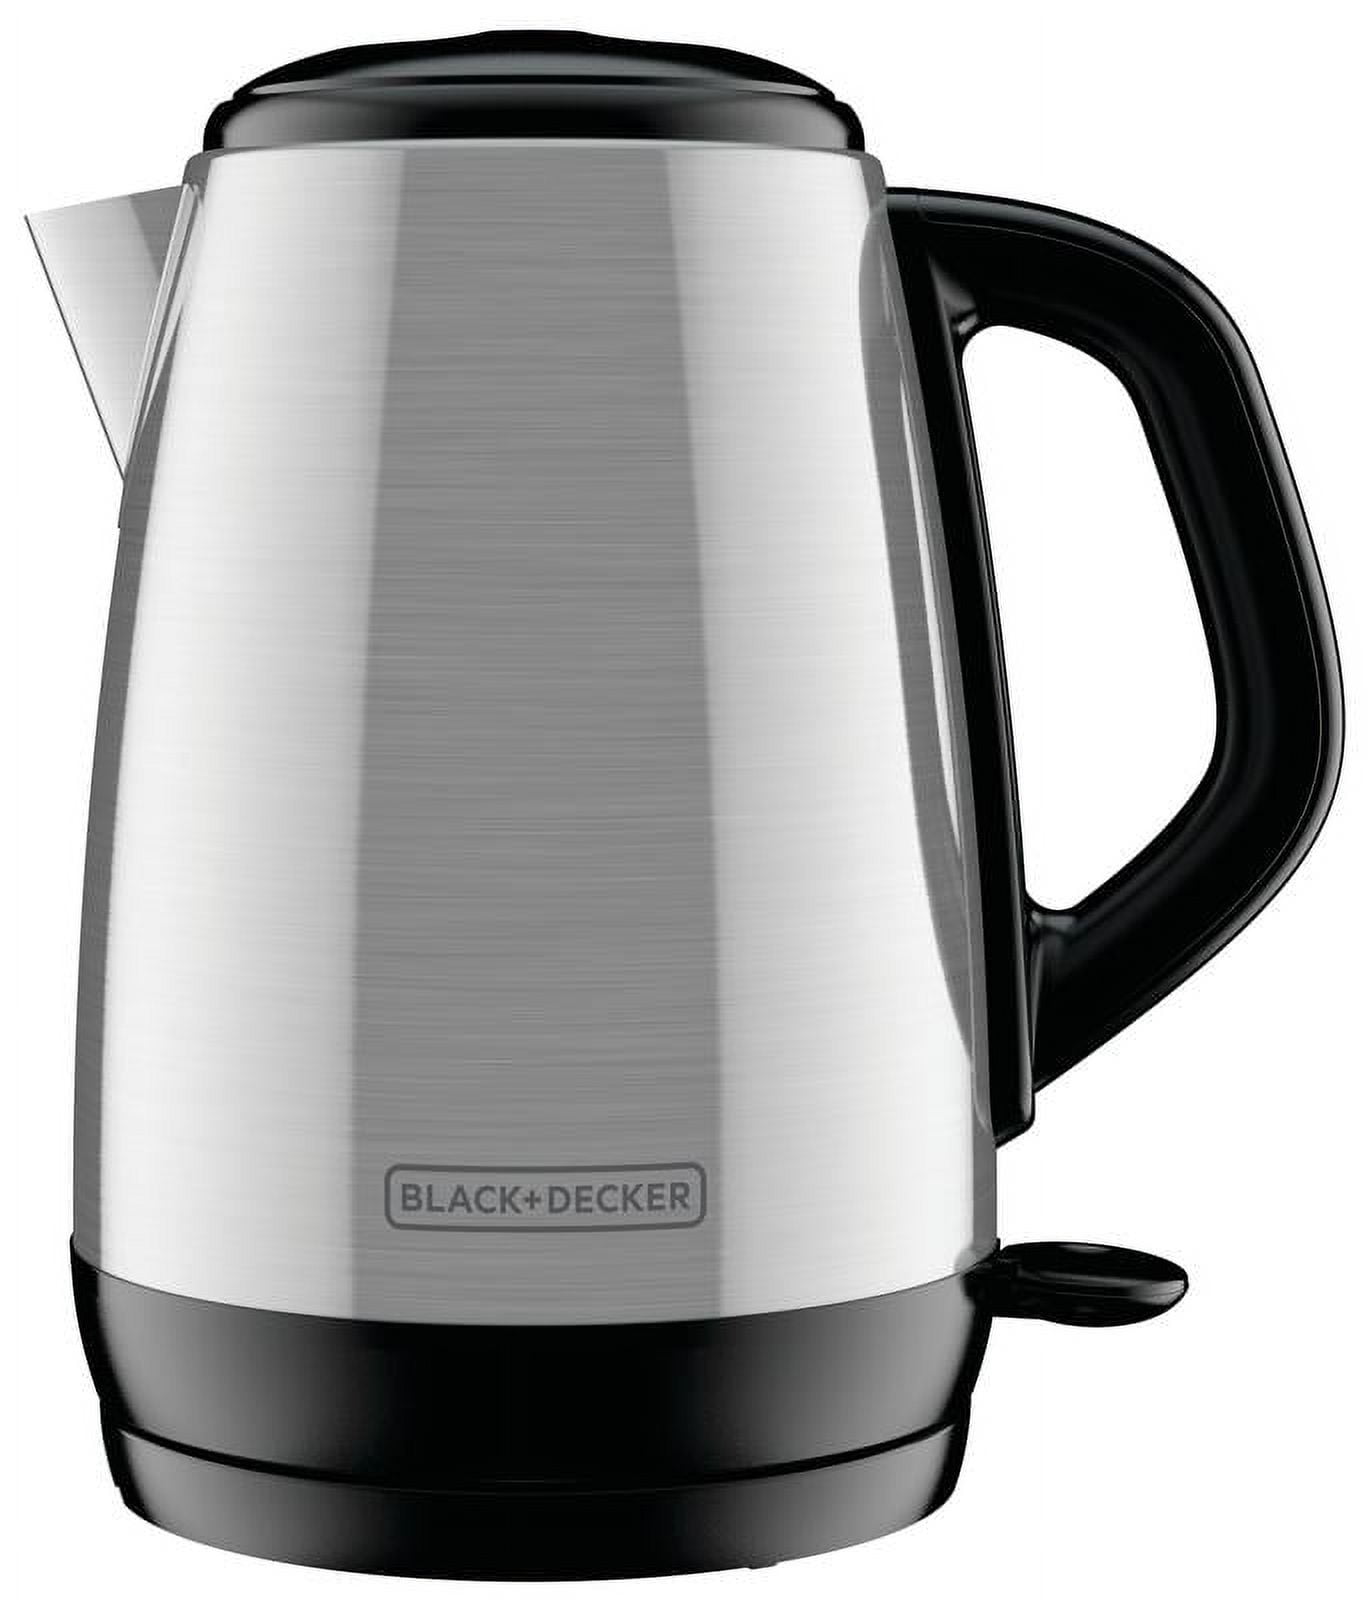 Hamilton Beach Variable Temperature Electric Kettle, 1.7 Liter Capacity,  Black Stainless Steel, 41027 